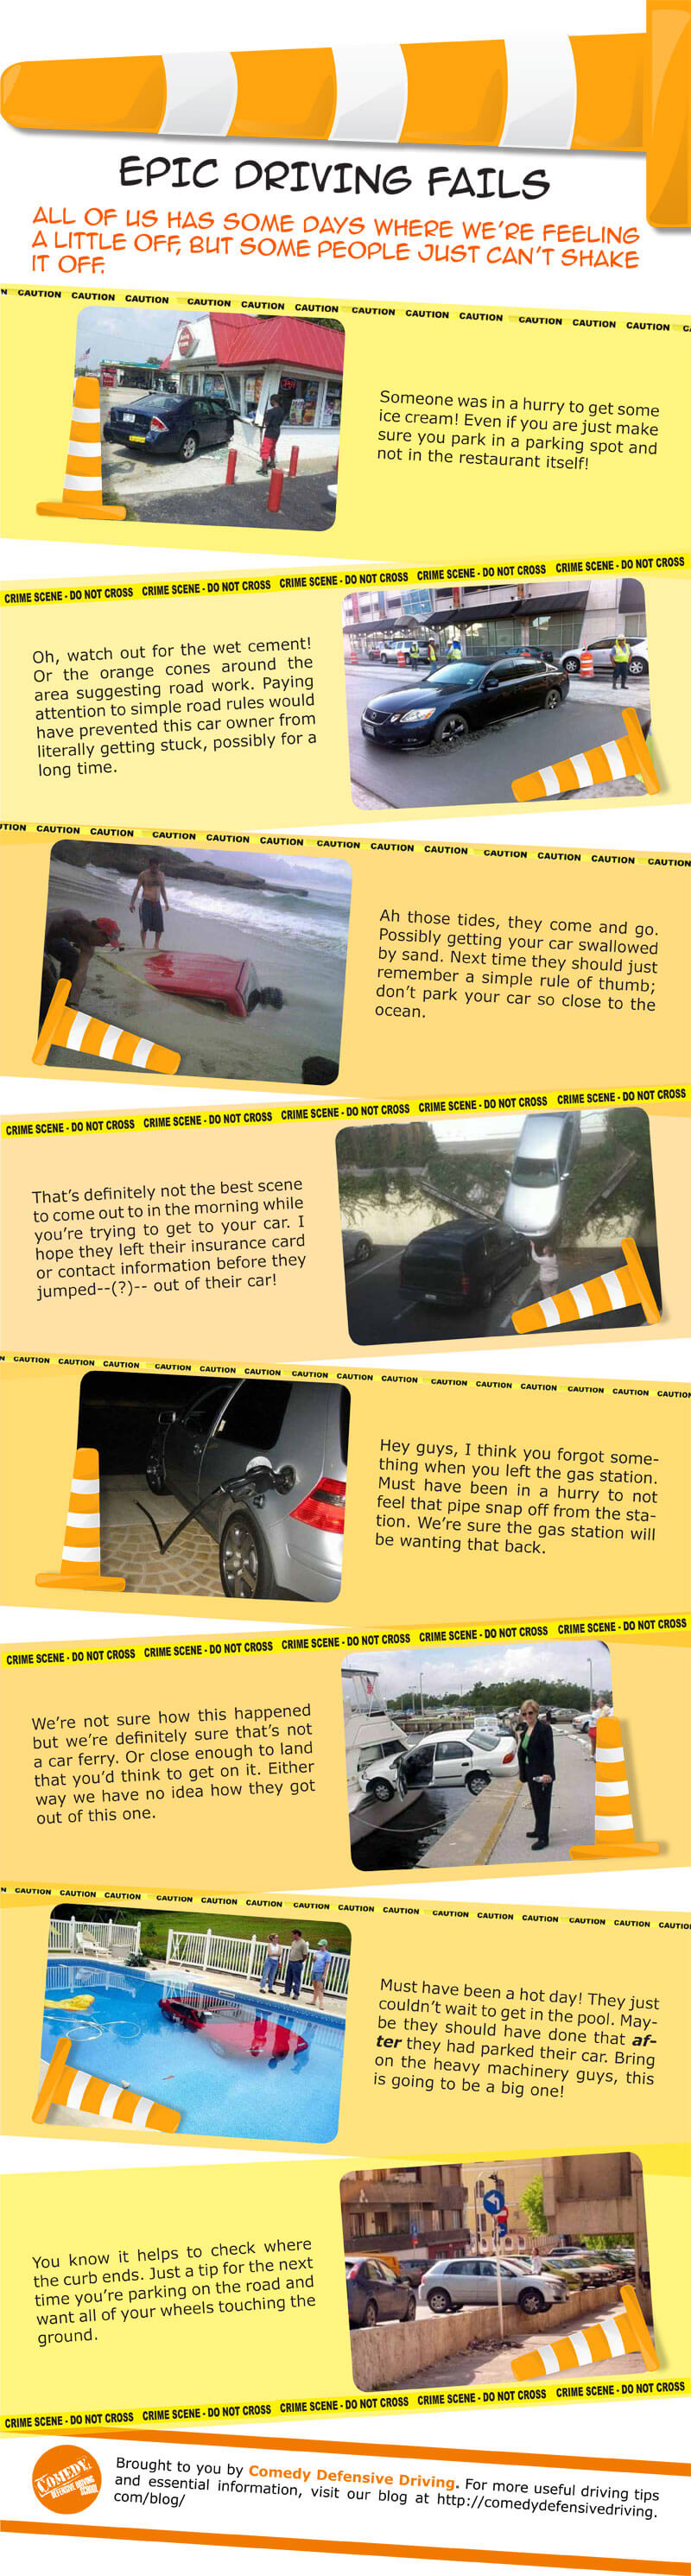 Epic Driving Fails Infographic